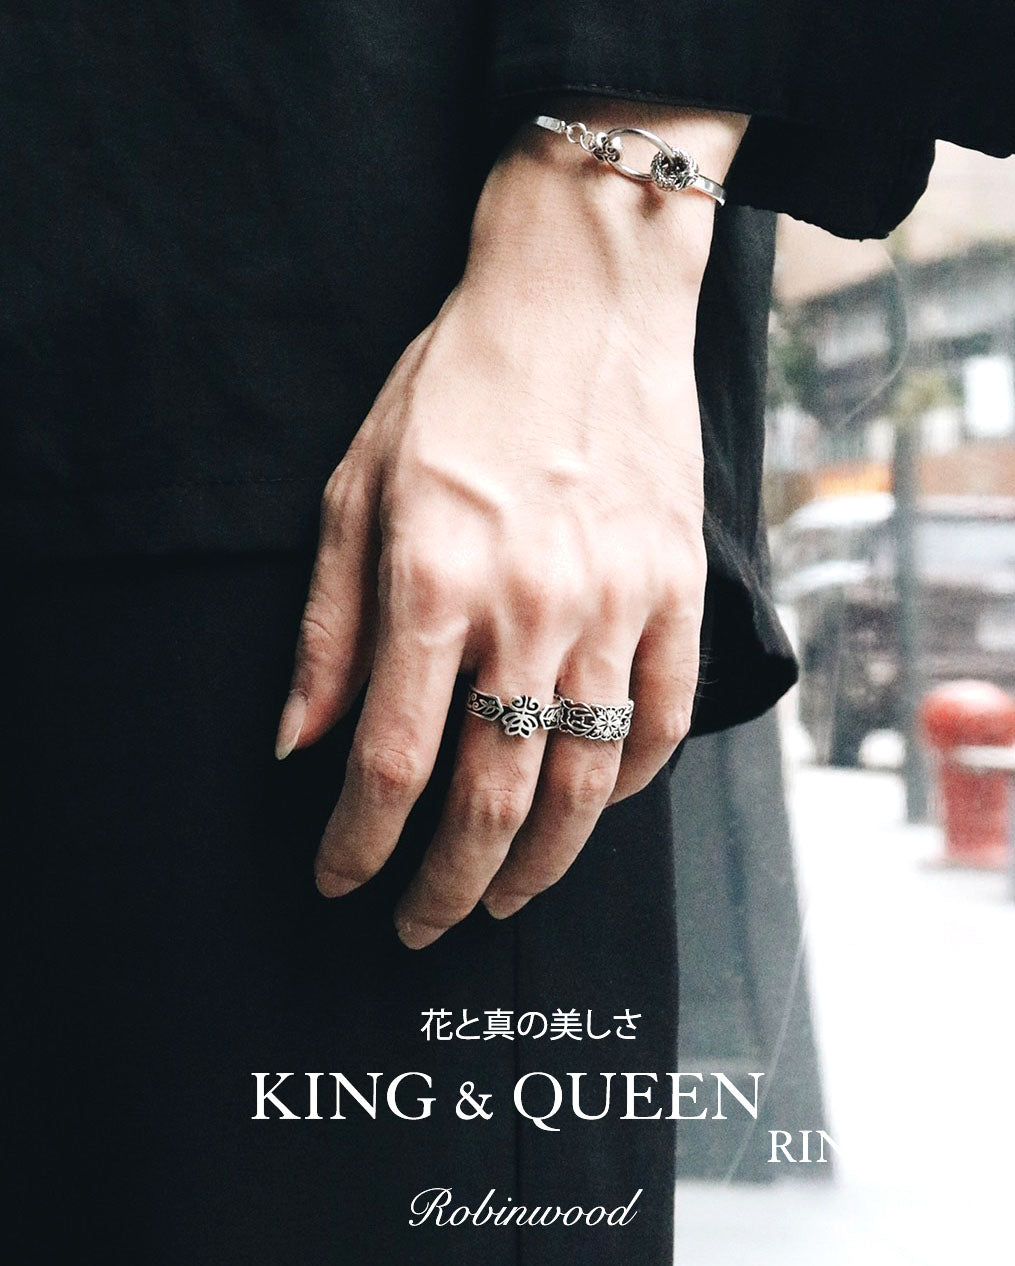 Limited Collection's "KING & QUEEN Ring", Signature Robinwood Logo, Masterpieces Design